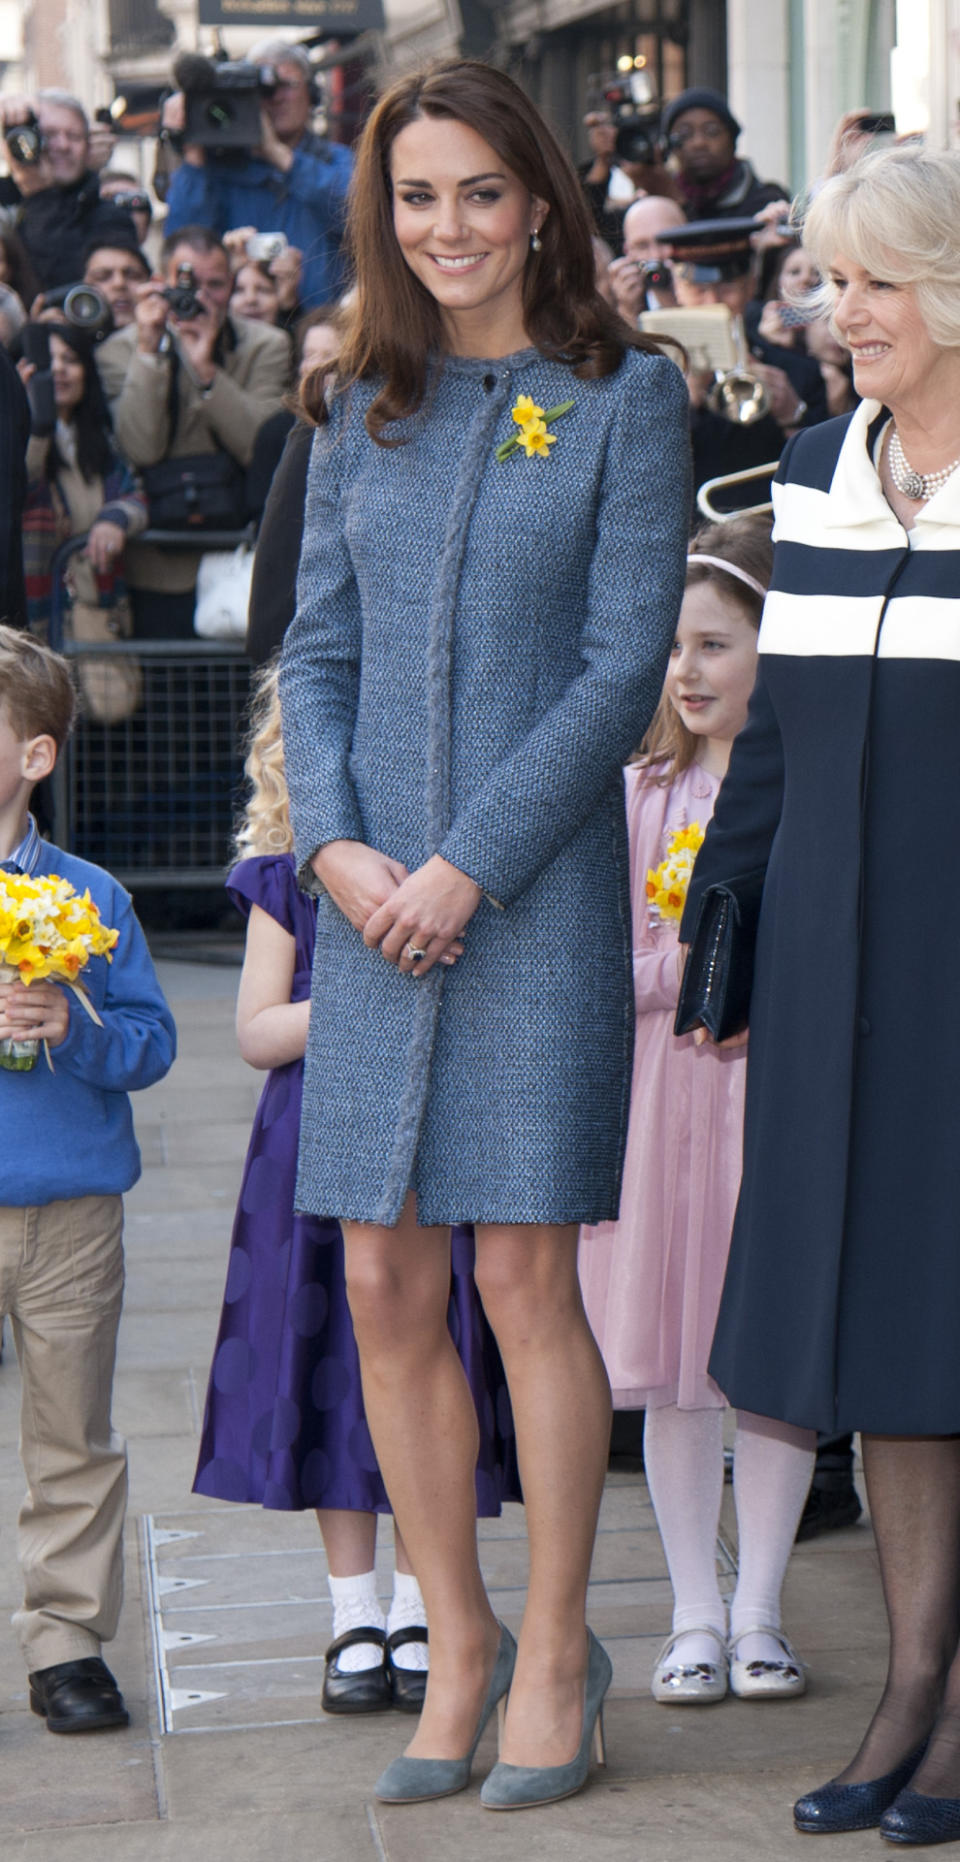 <p>Kate visited Fortnum and Mason wearing a blue tweed coat by Missoni paired with grey Rupert Sanderson pumps. </p><p><i>[Photo: PA]</i></p>